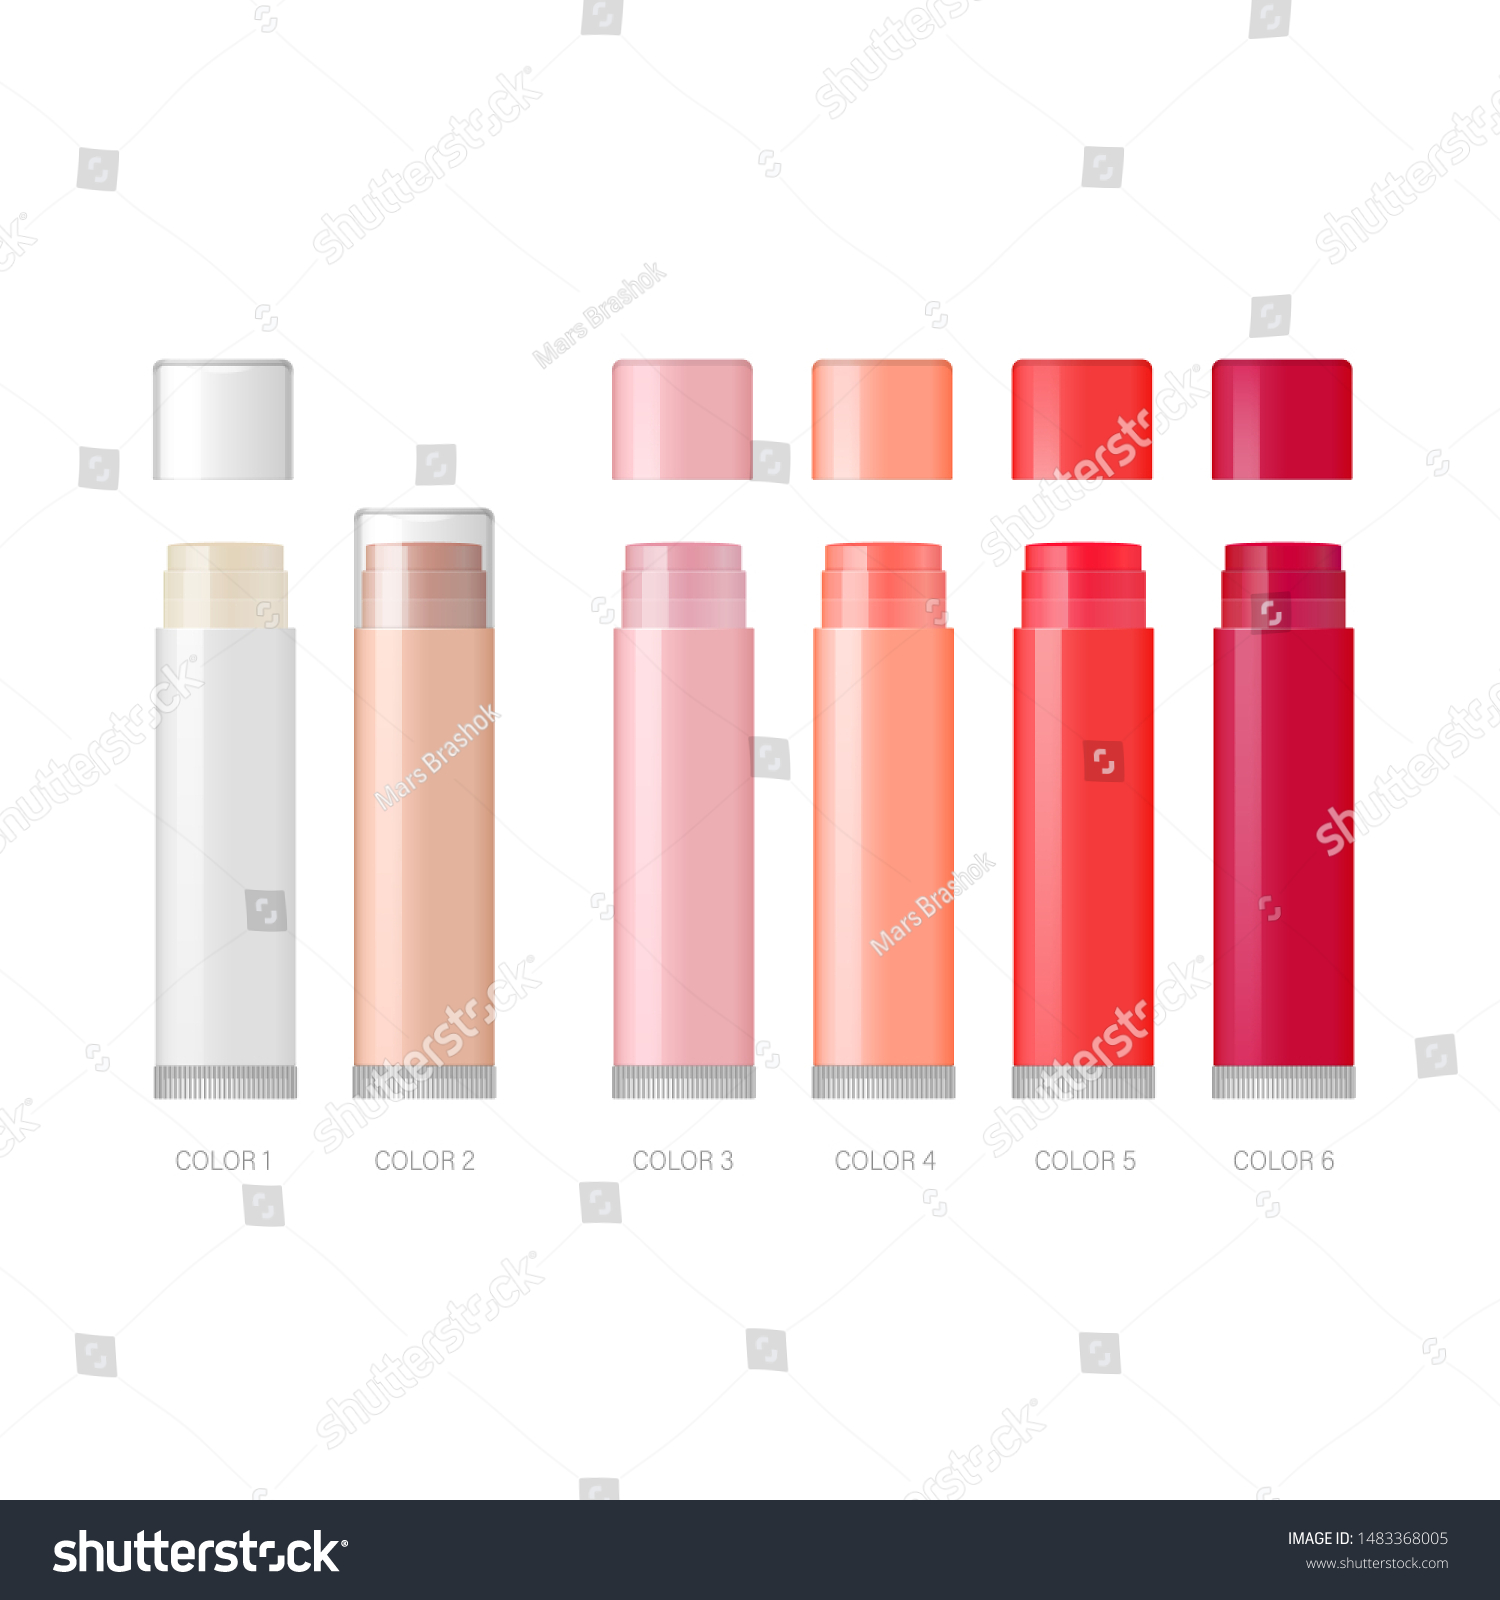 Download Lip Balm Packaging Template Vector Lipstick Stock Vector Royalty Free 1483368005